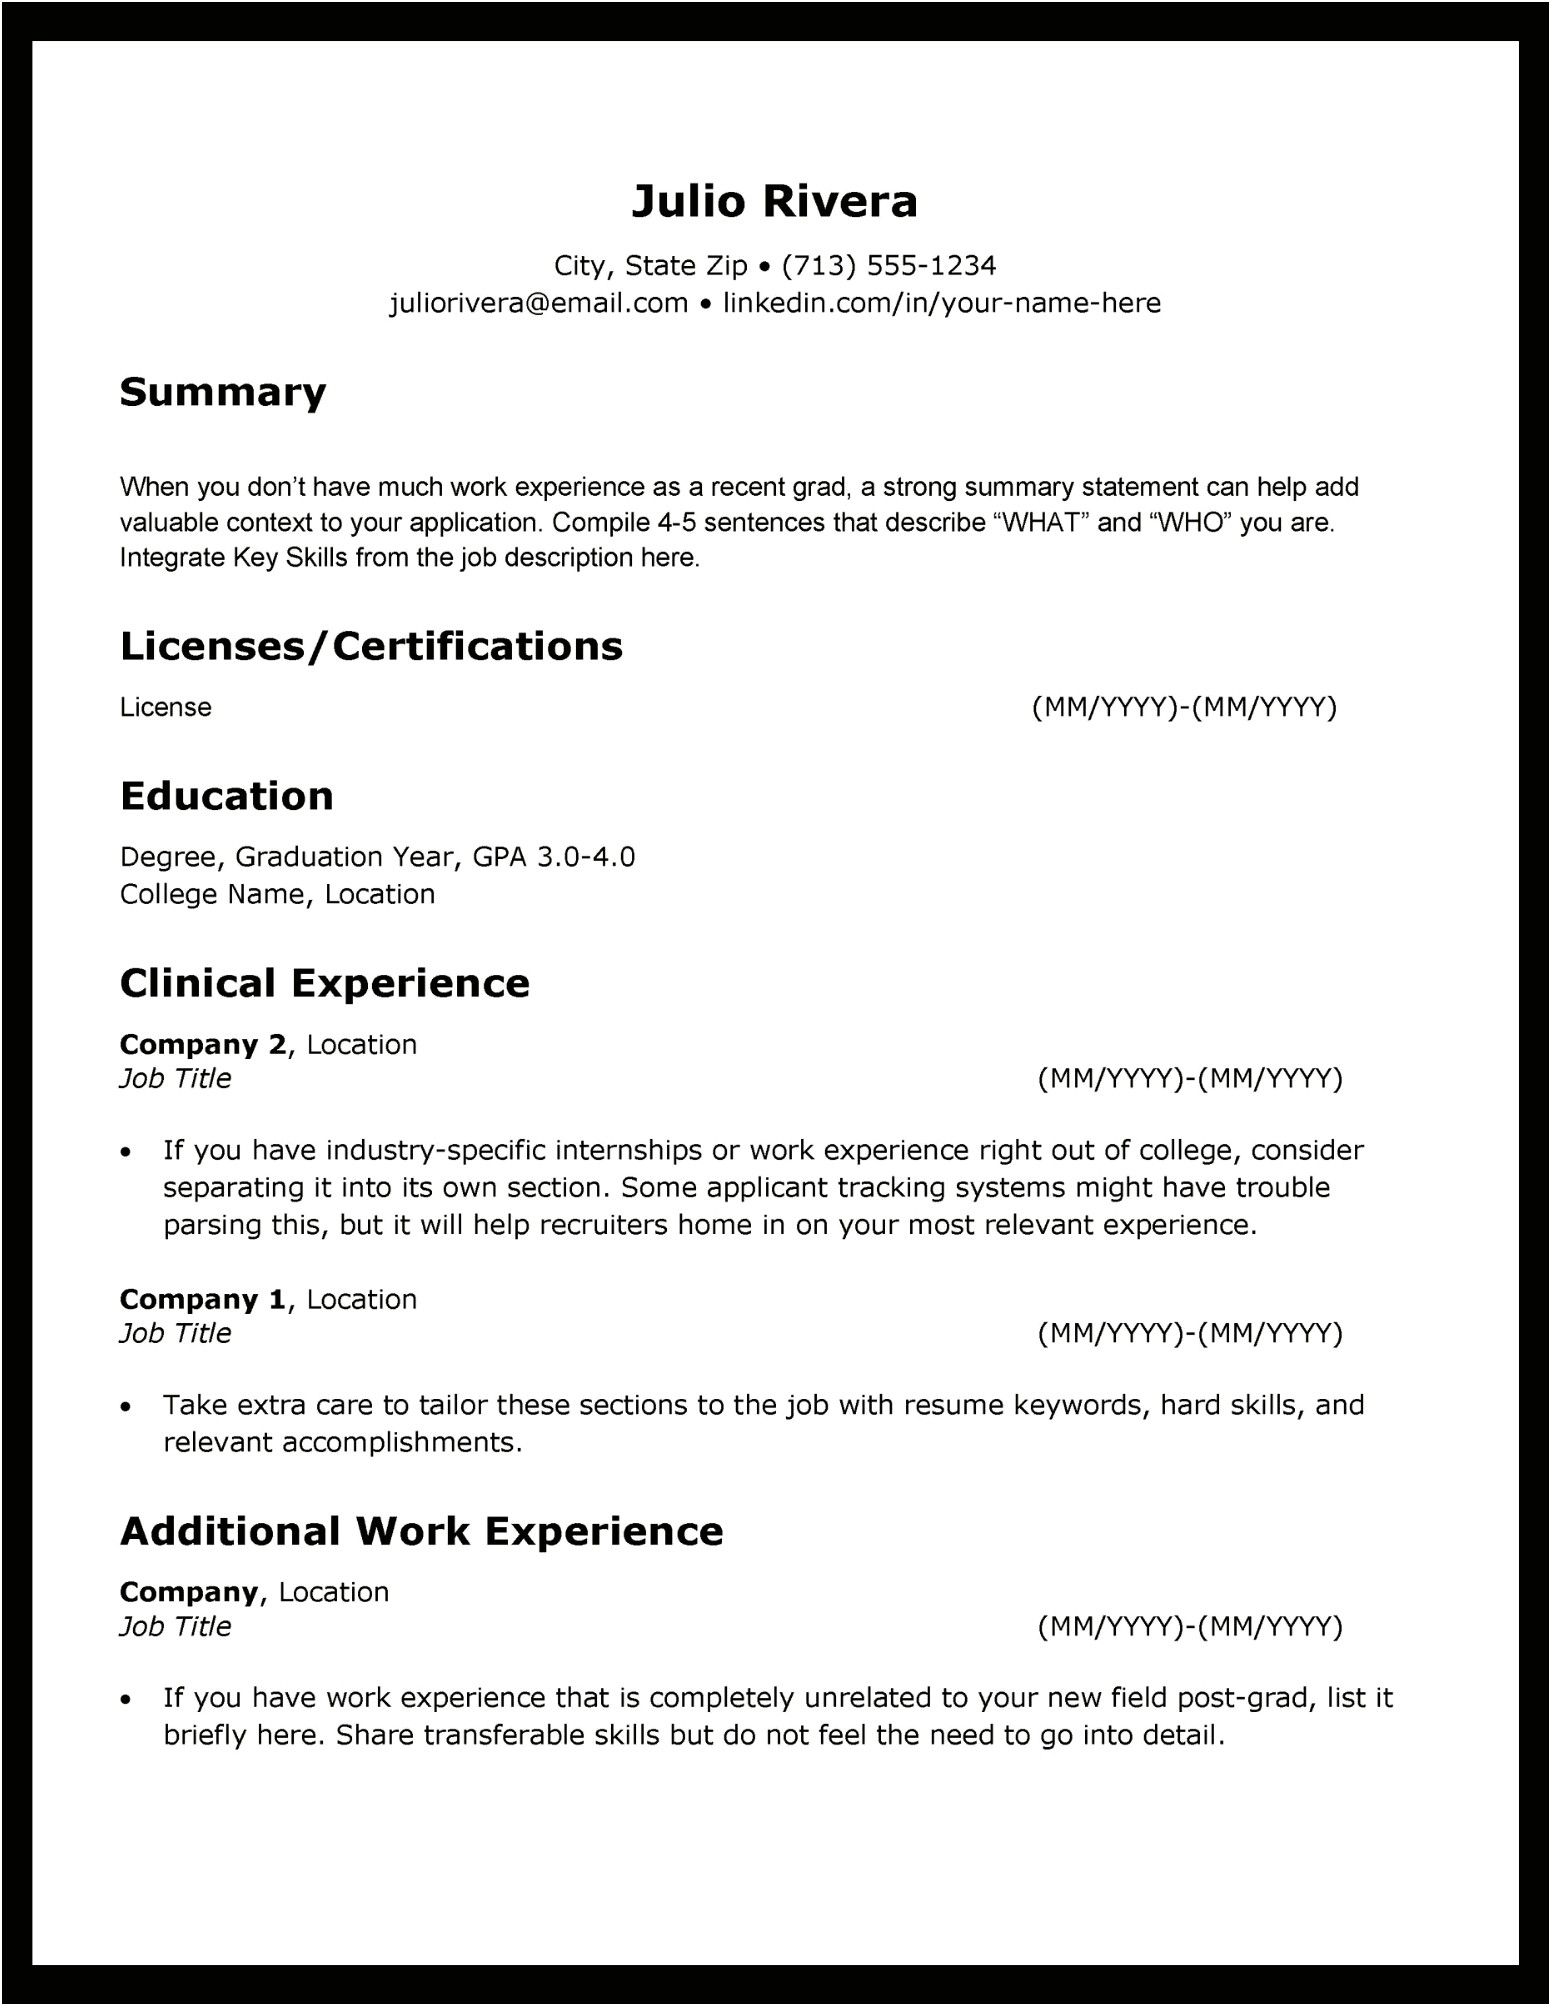 Best Resume Format For Post Military